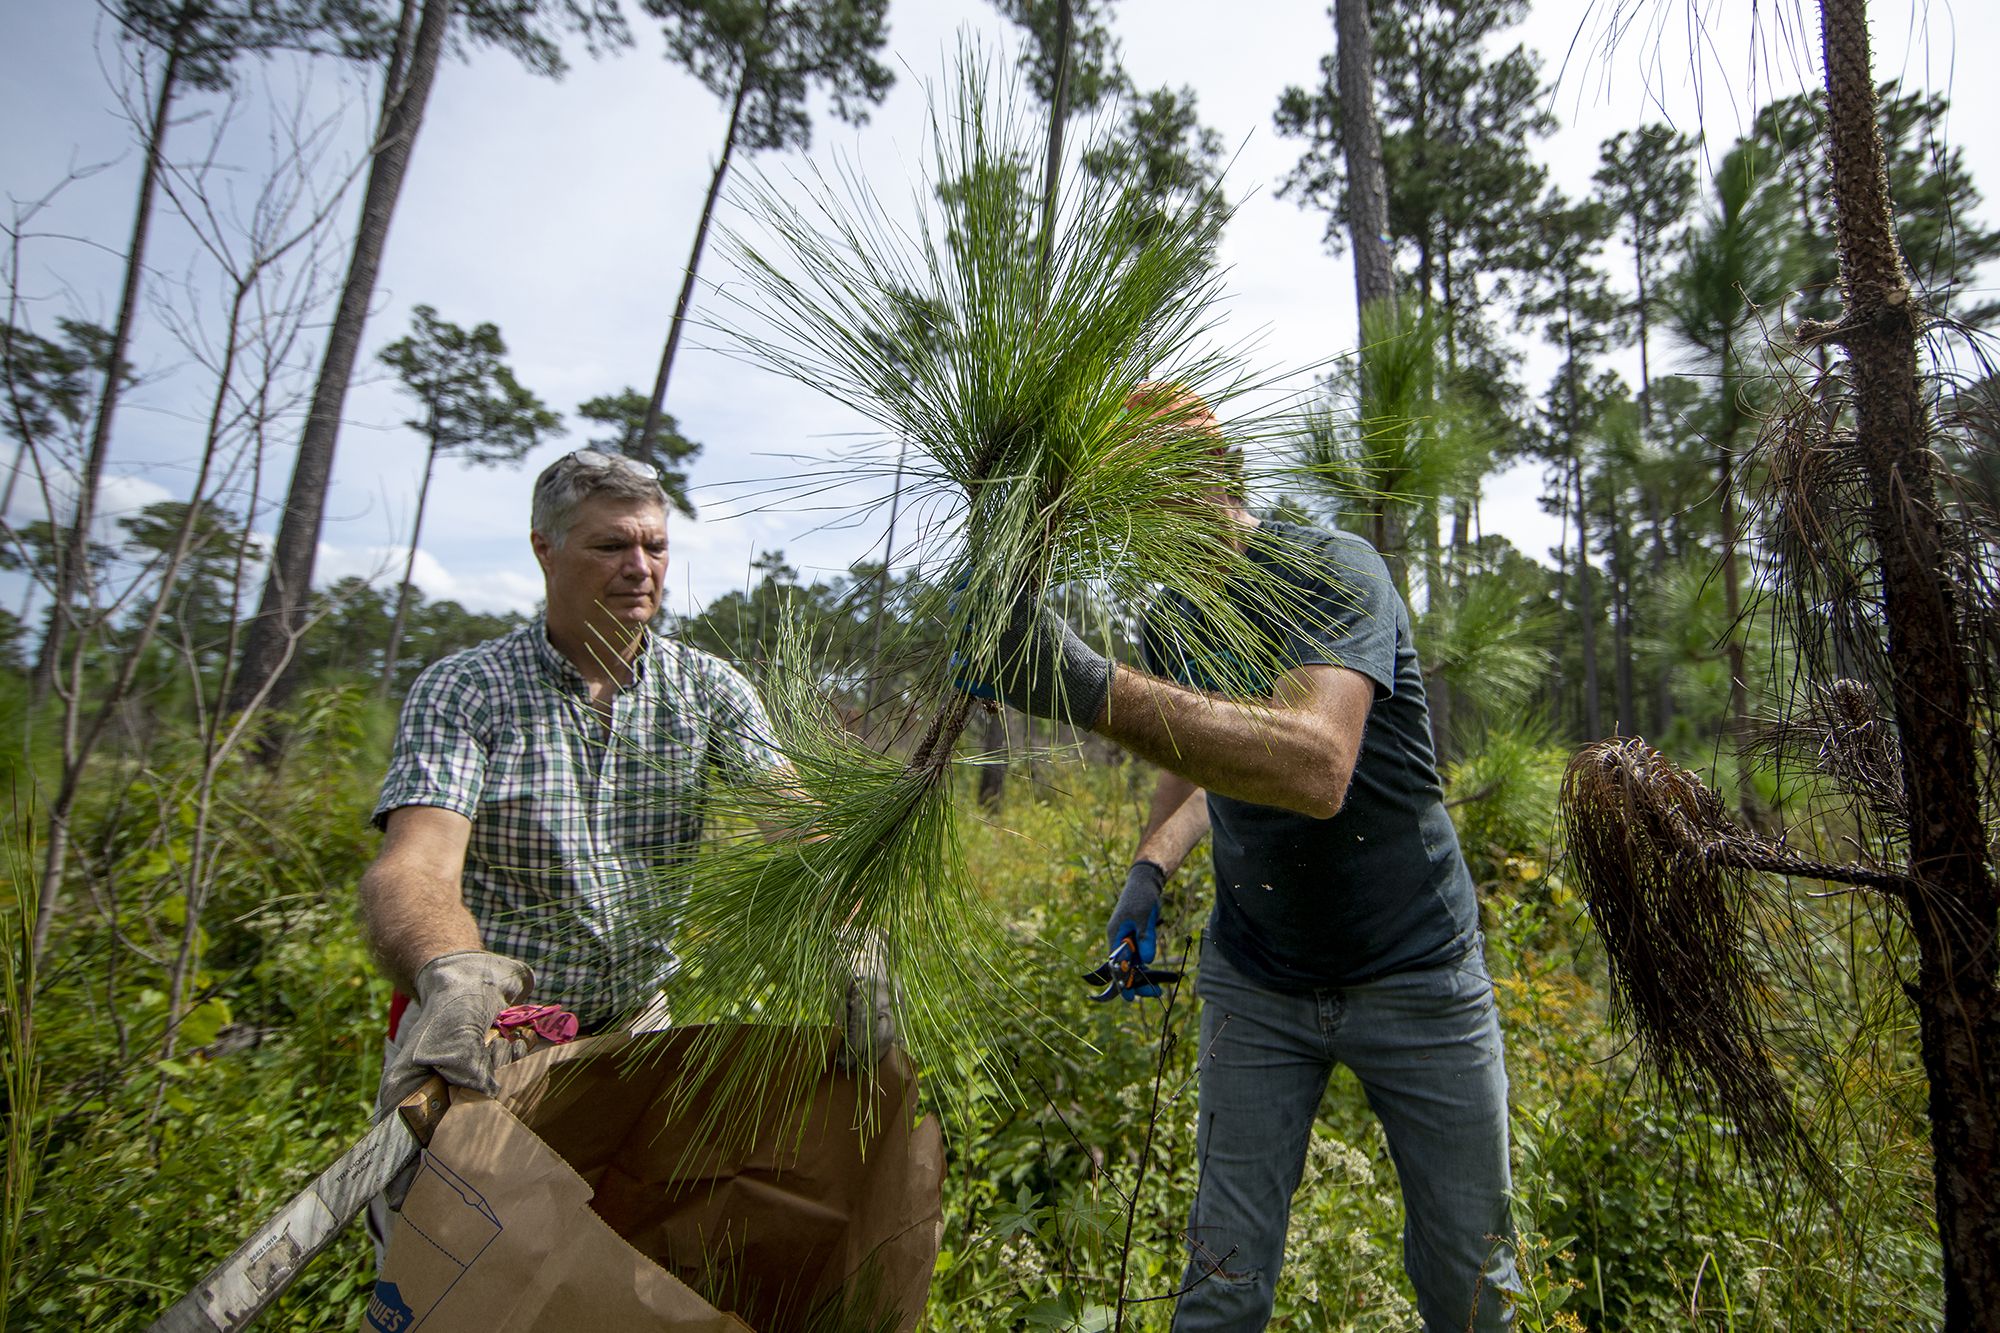 A man holds open a large brown sack. A second man places a long pine branch into the bag. The second man's face is obscured by the branch's long pine needles.